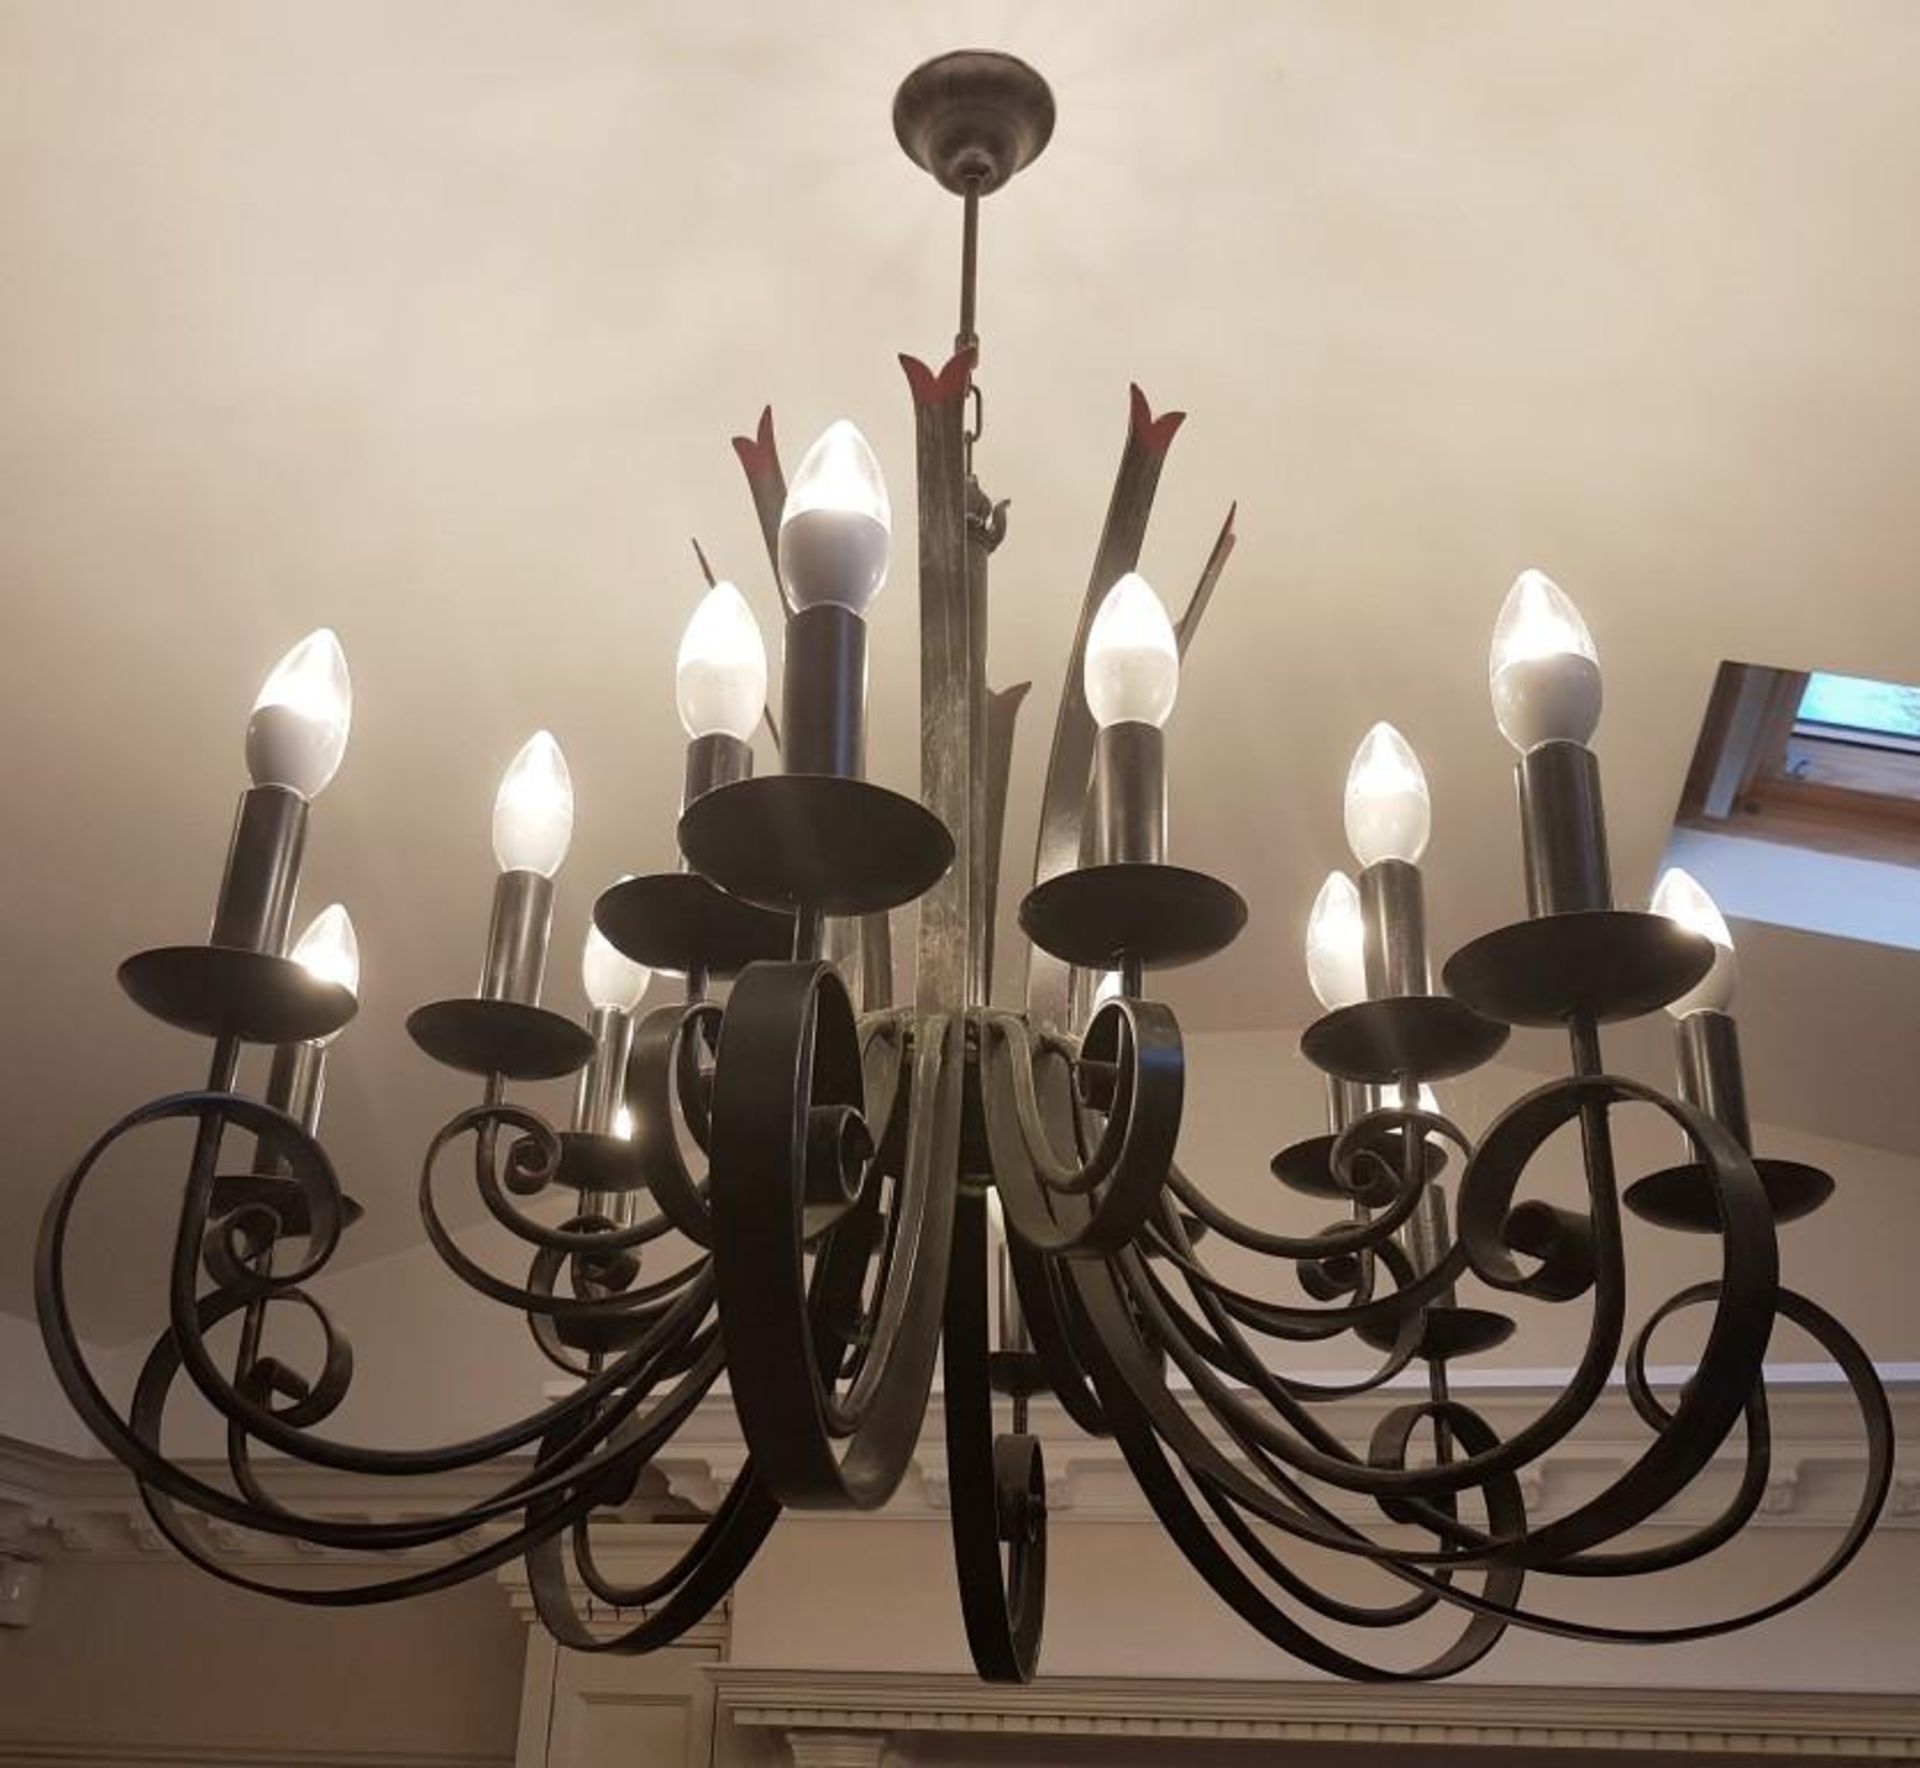 Impressive Bespoke 16-Sconce Wrought Iron Chandelier Light Fitting- CL266 - Used, In Very Good Condi